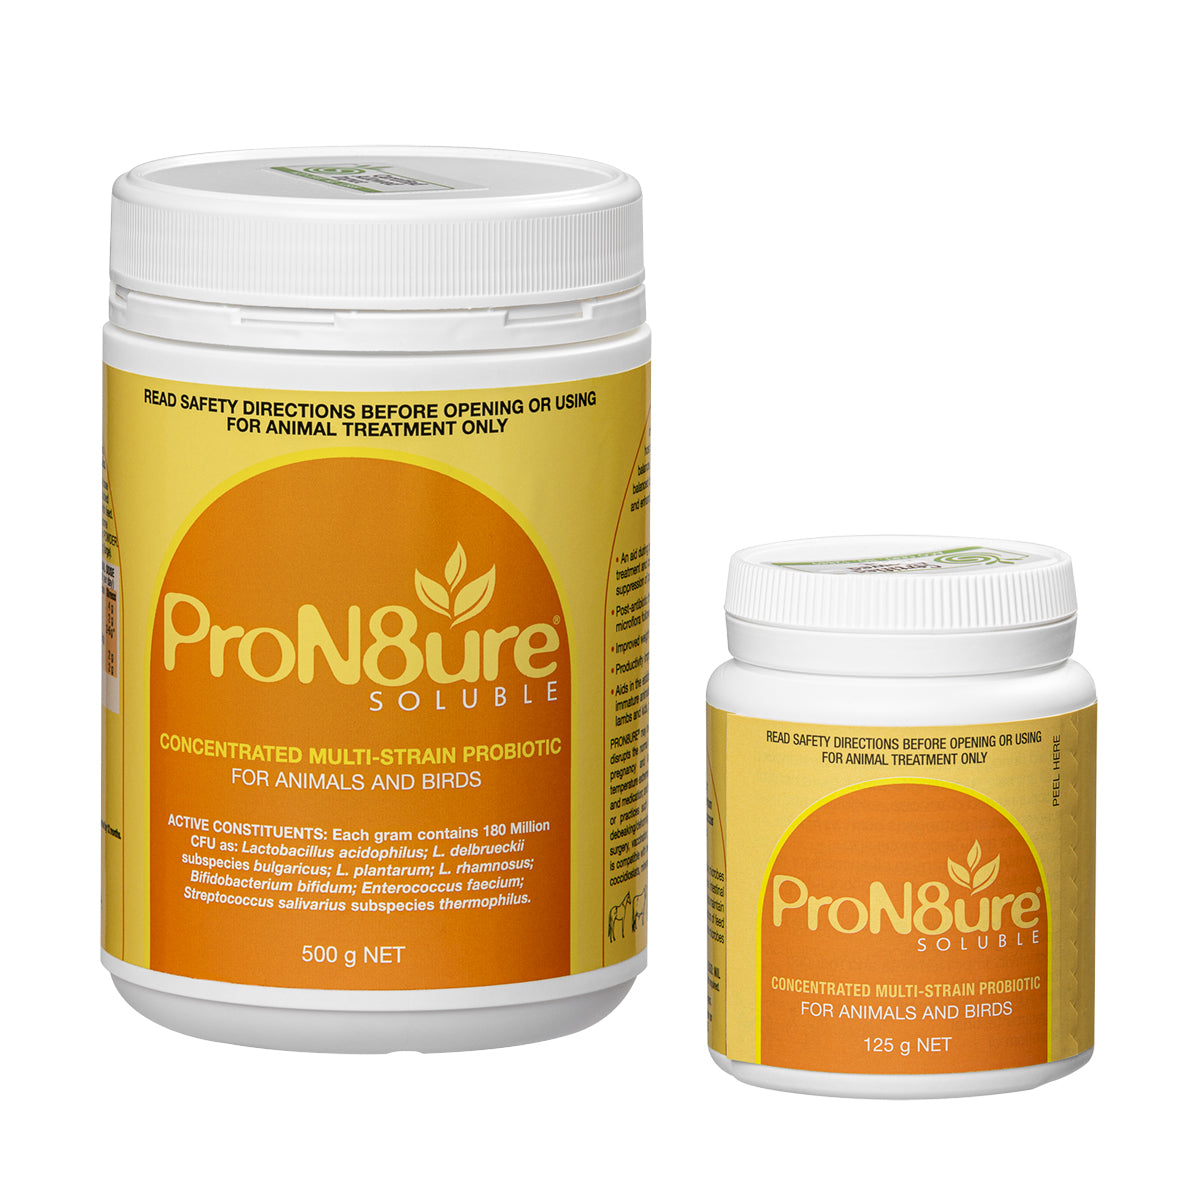 ProN8ure (formerly Protexin) Probiotic Soluble Powder